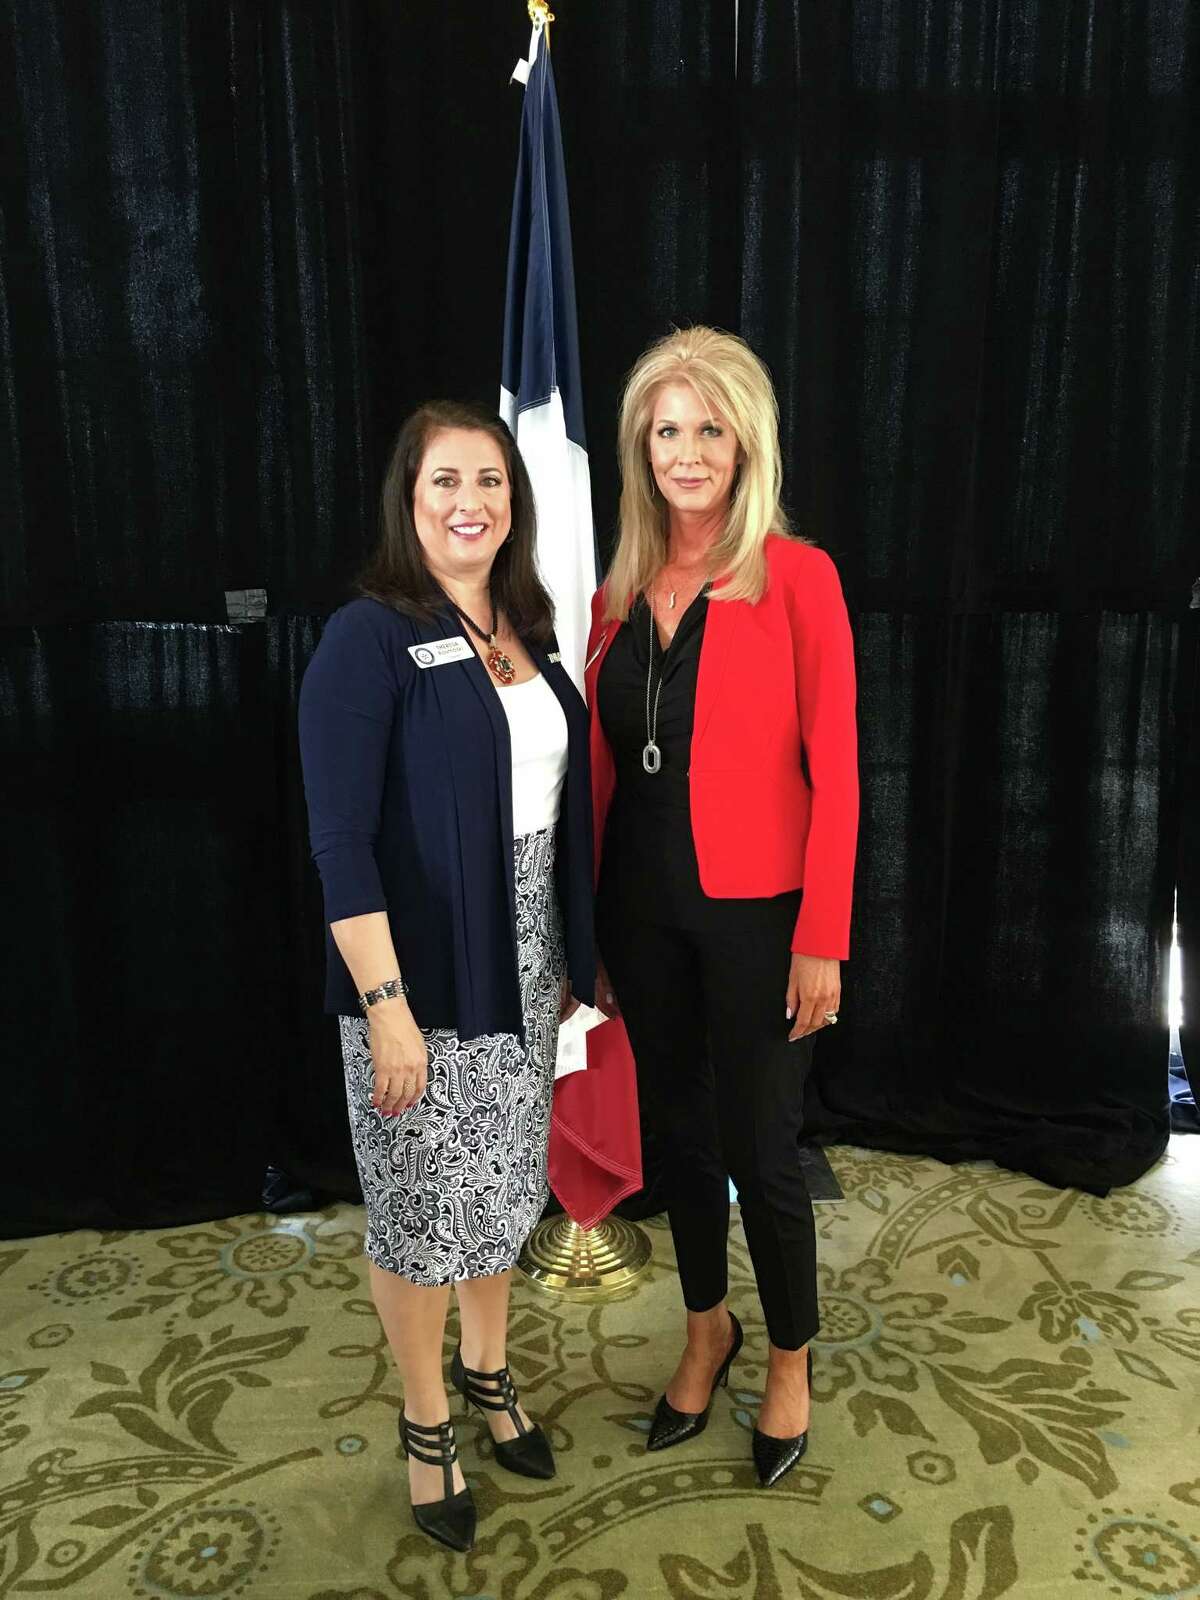 Texas Federation of Republican Women President Theresa Kosmoski, left, is pictured with North Shore Republican Women President Stephanie Collins at the NSRW March 1 meeting.